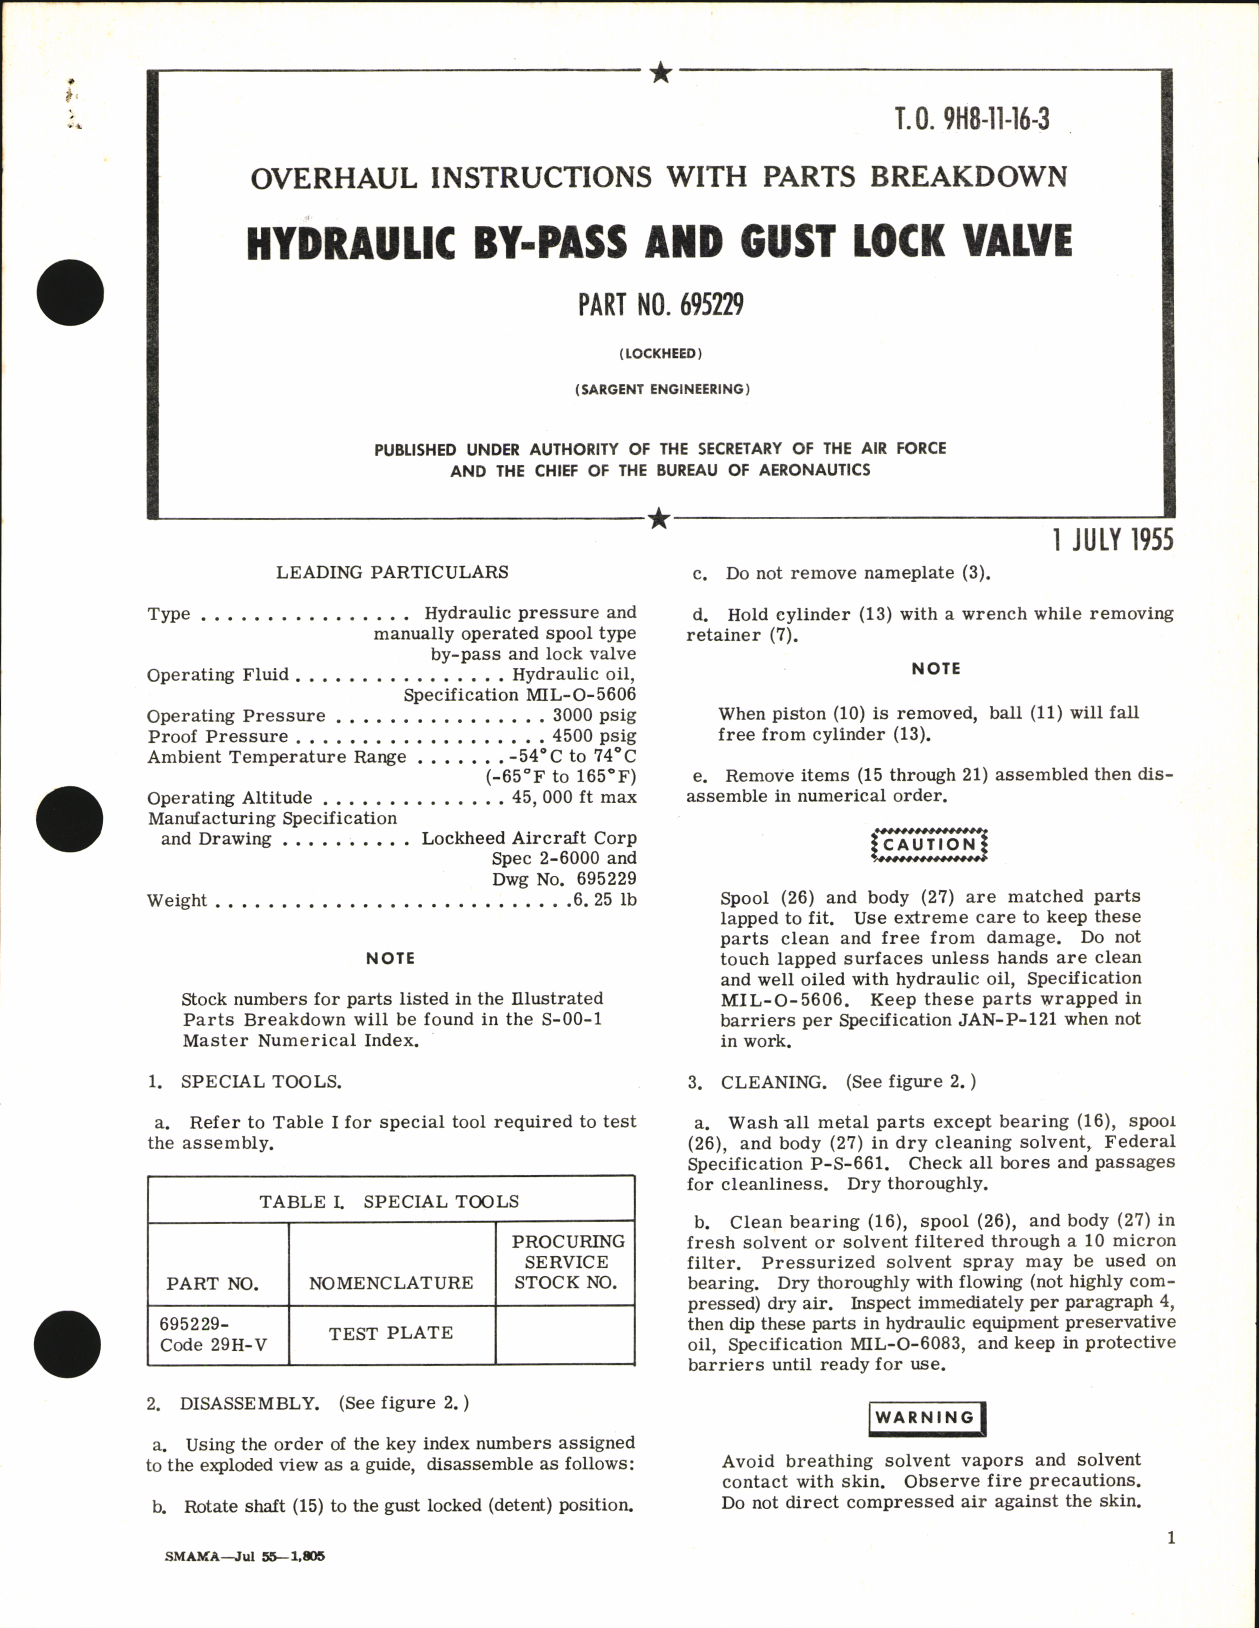 Sample page 1 from AirCorps Library document: Overhaul Instructions with Parts Breakdown for Hydraulic By-Pass and Gust Lock Valve Part No. 695229